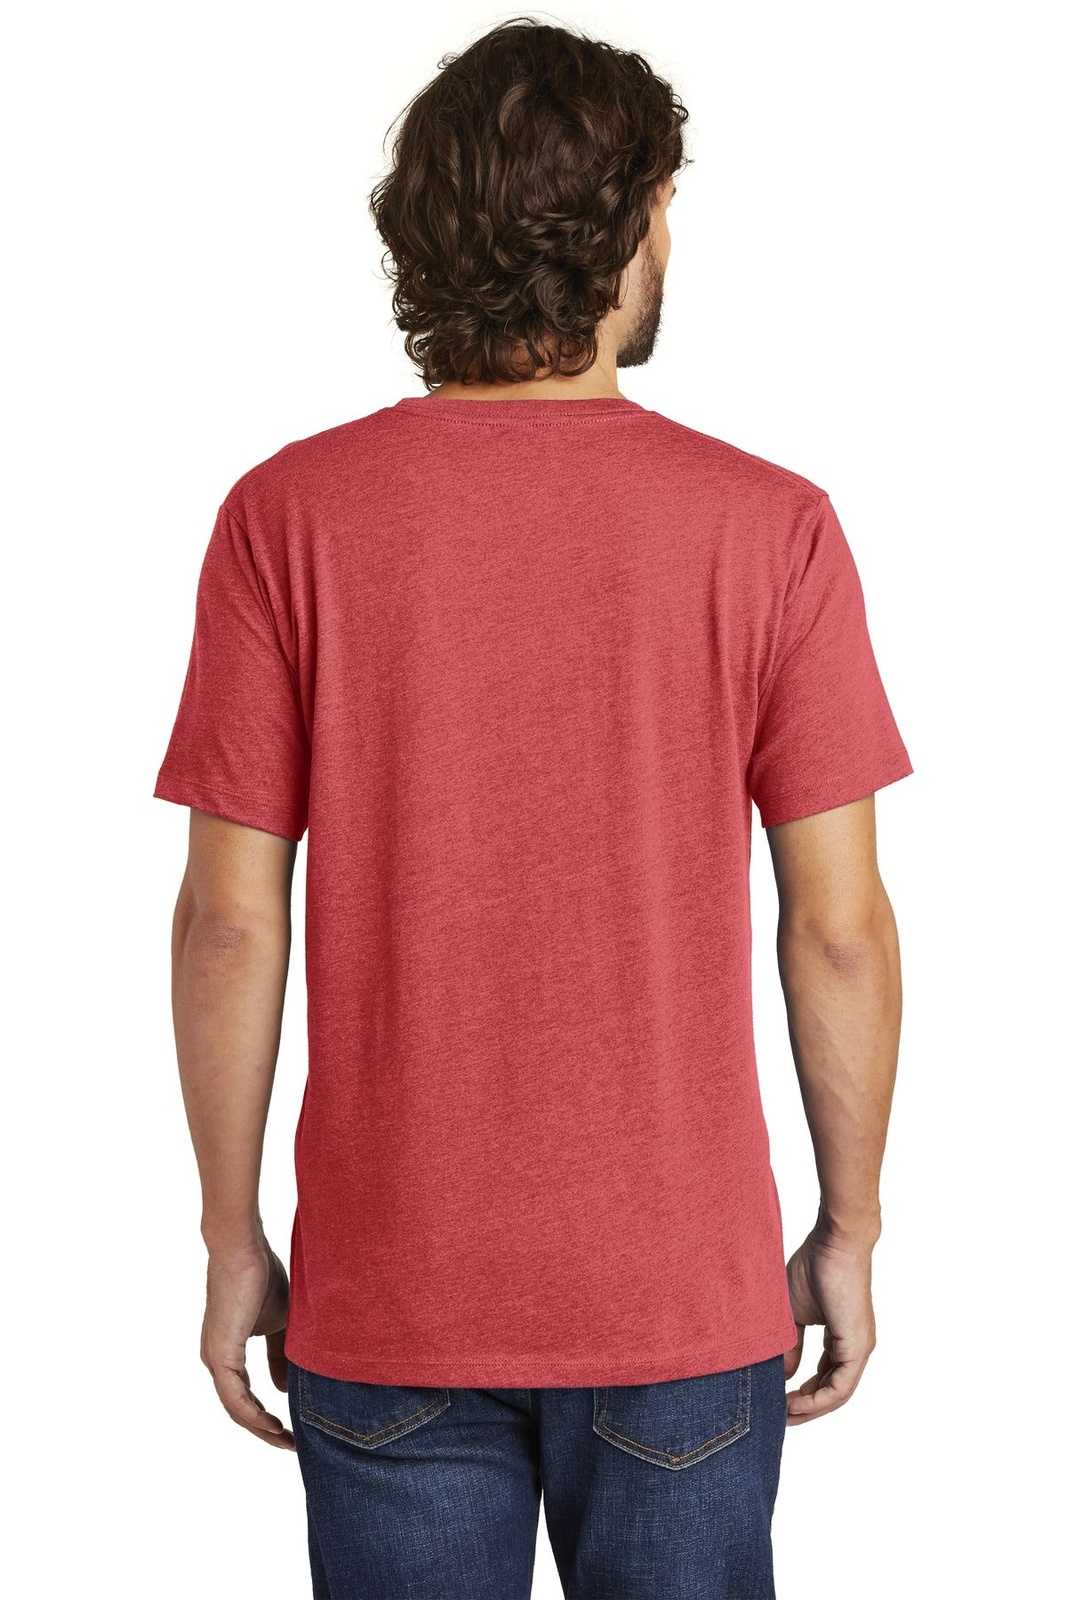 Alternative AA6040 Rebel Blended Jersey Tee - Heather Red - HIT a Double - 2